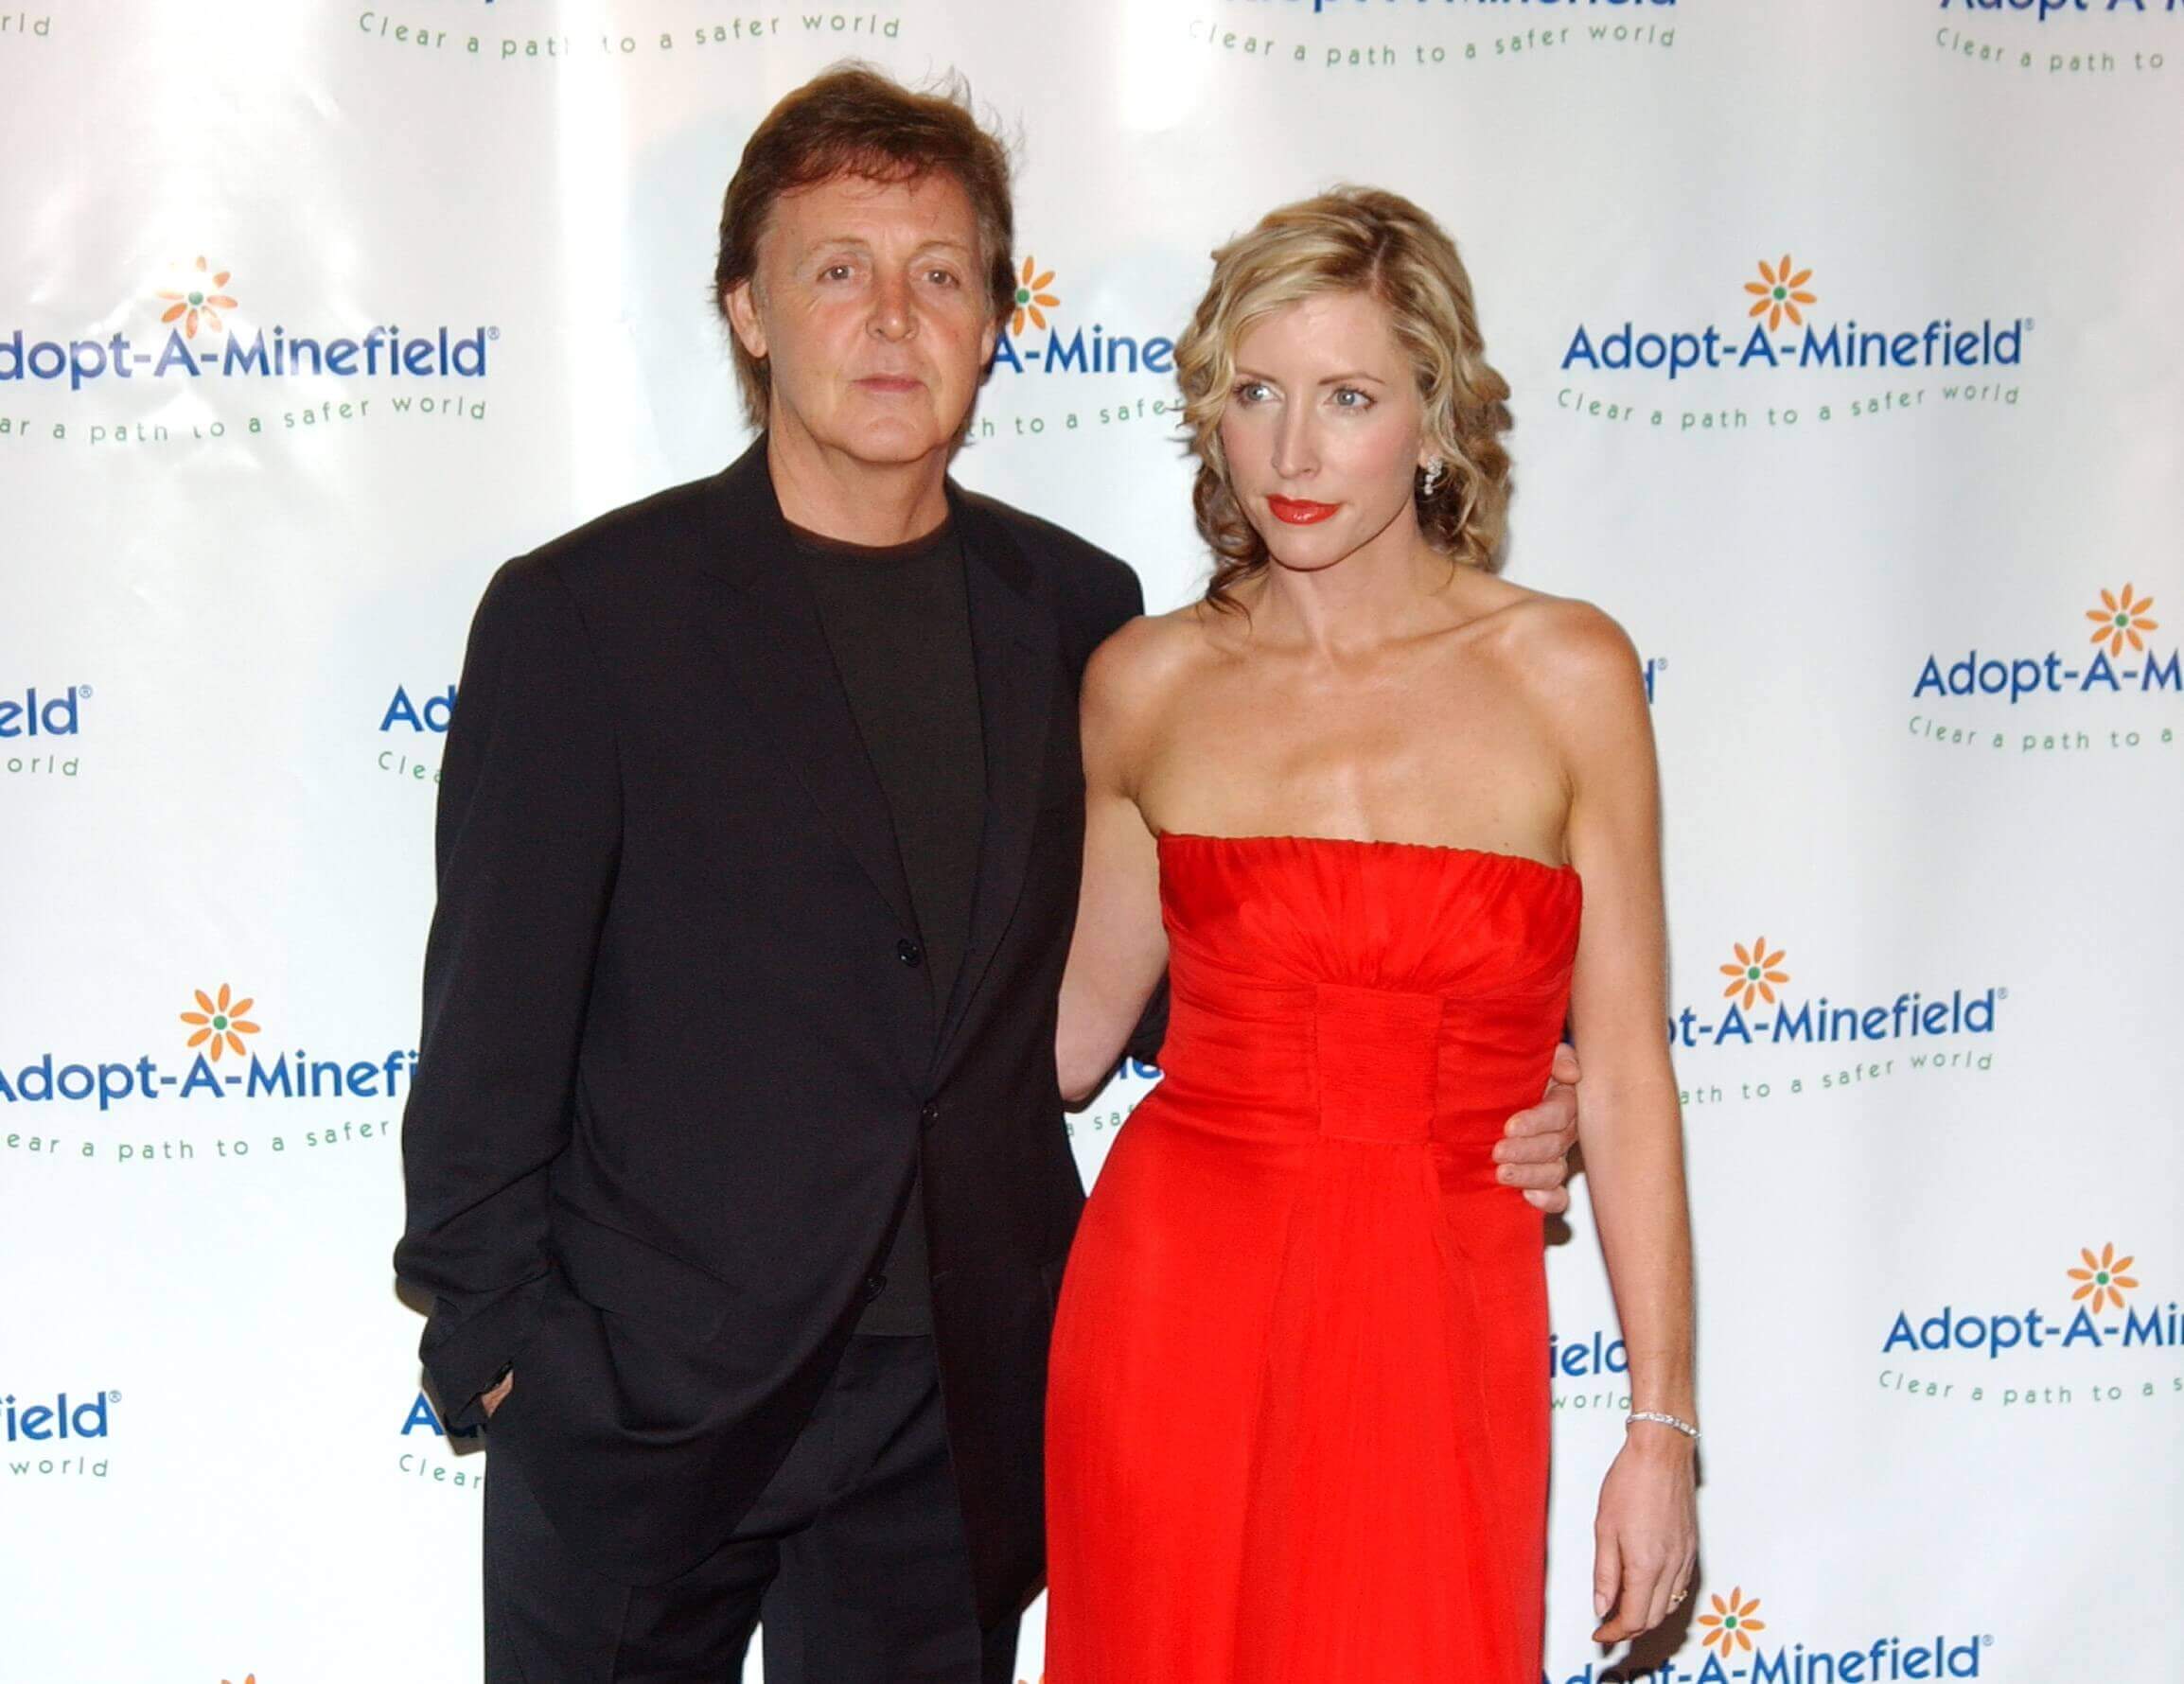 Paul McCartney and Heather Mills pose together. McCartney wears black and Mills wears a red dress.